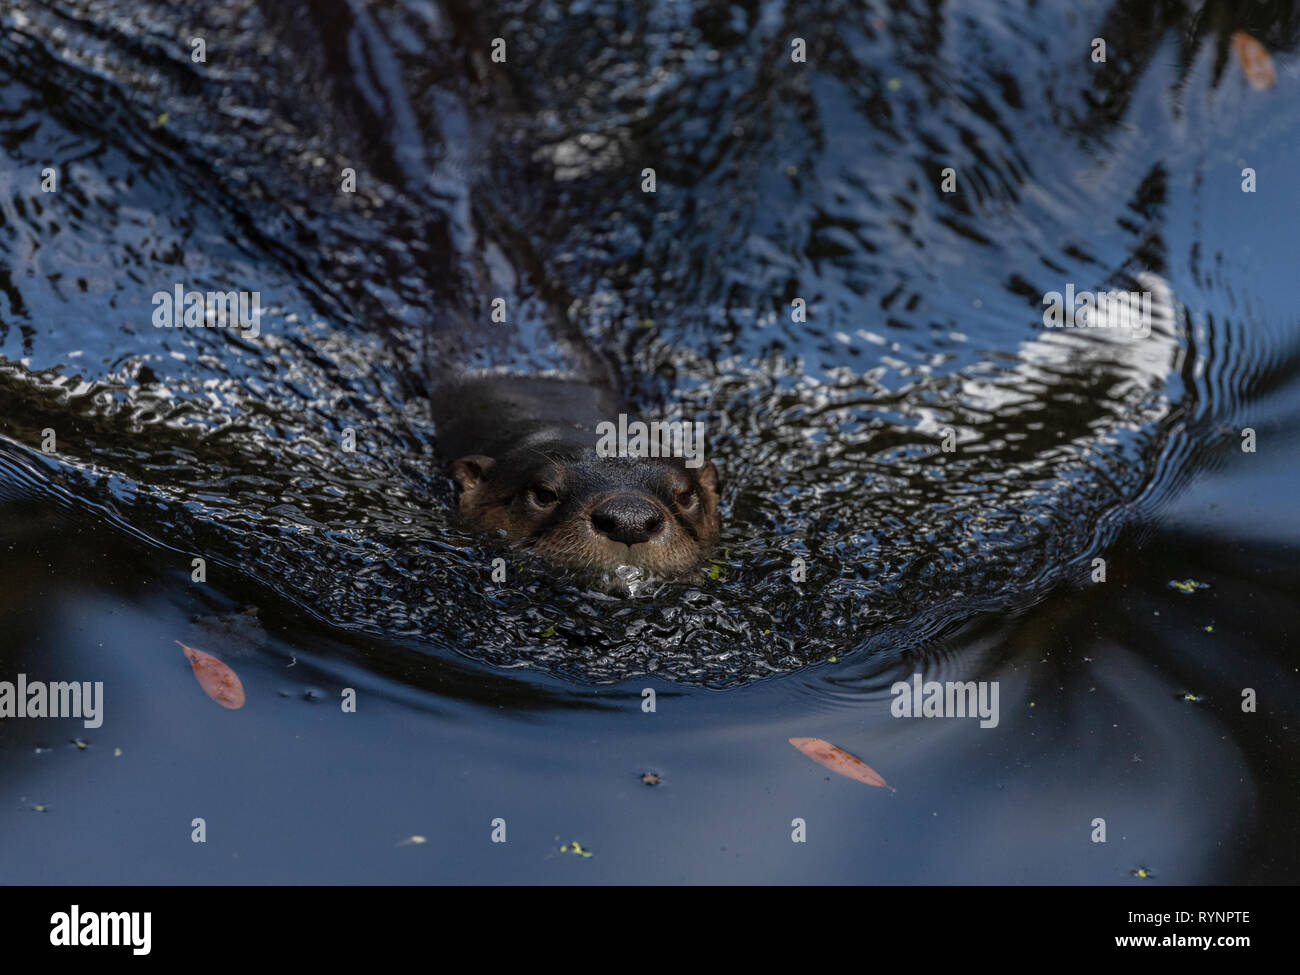 North American river otter, Lontra canadensis, swimming in river, Florida. Stock Photo